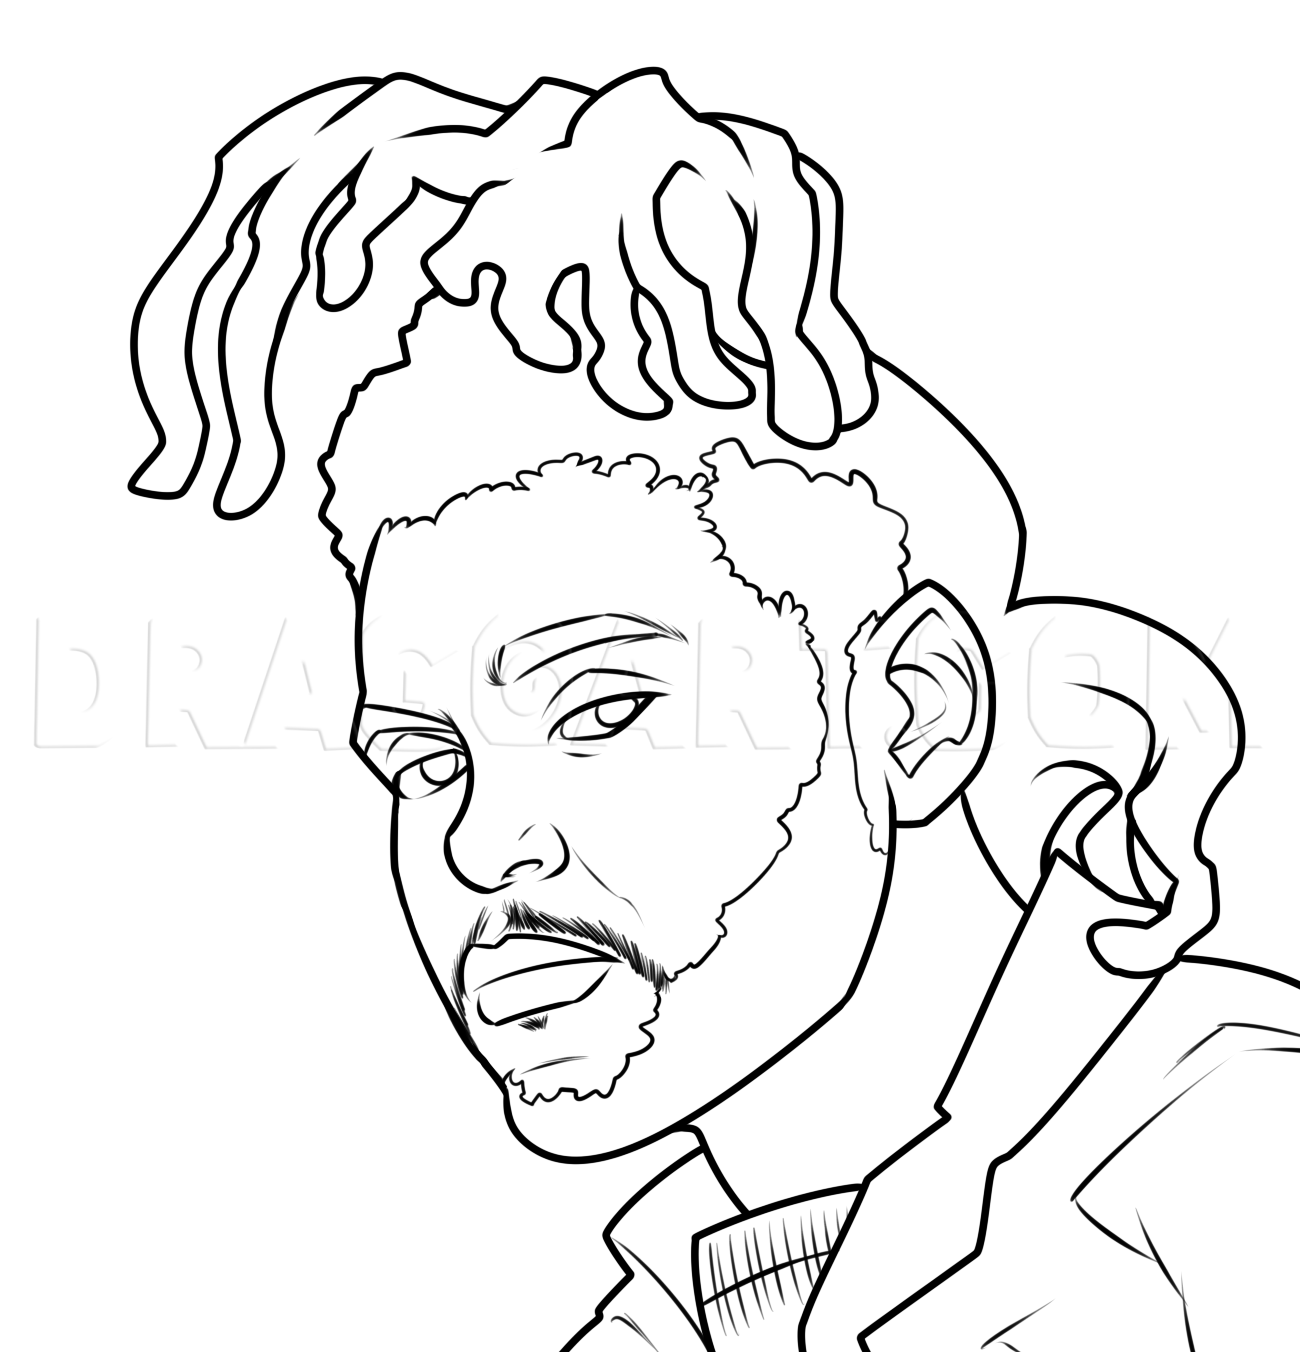 New The Weeknd Coloring Pages for Kids